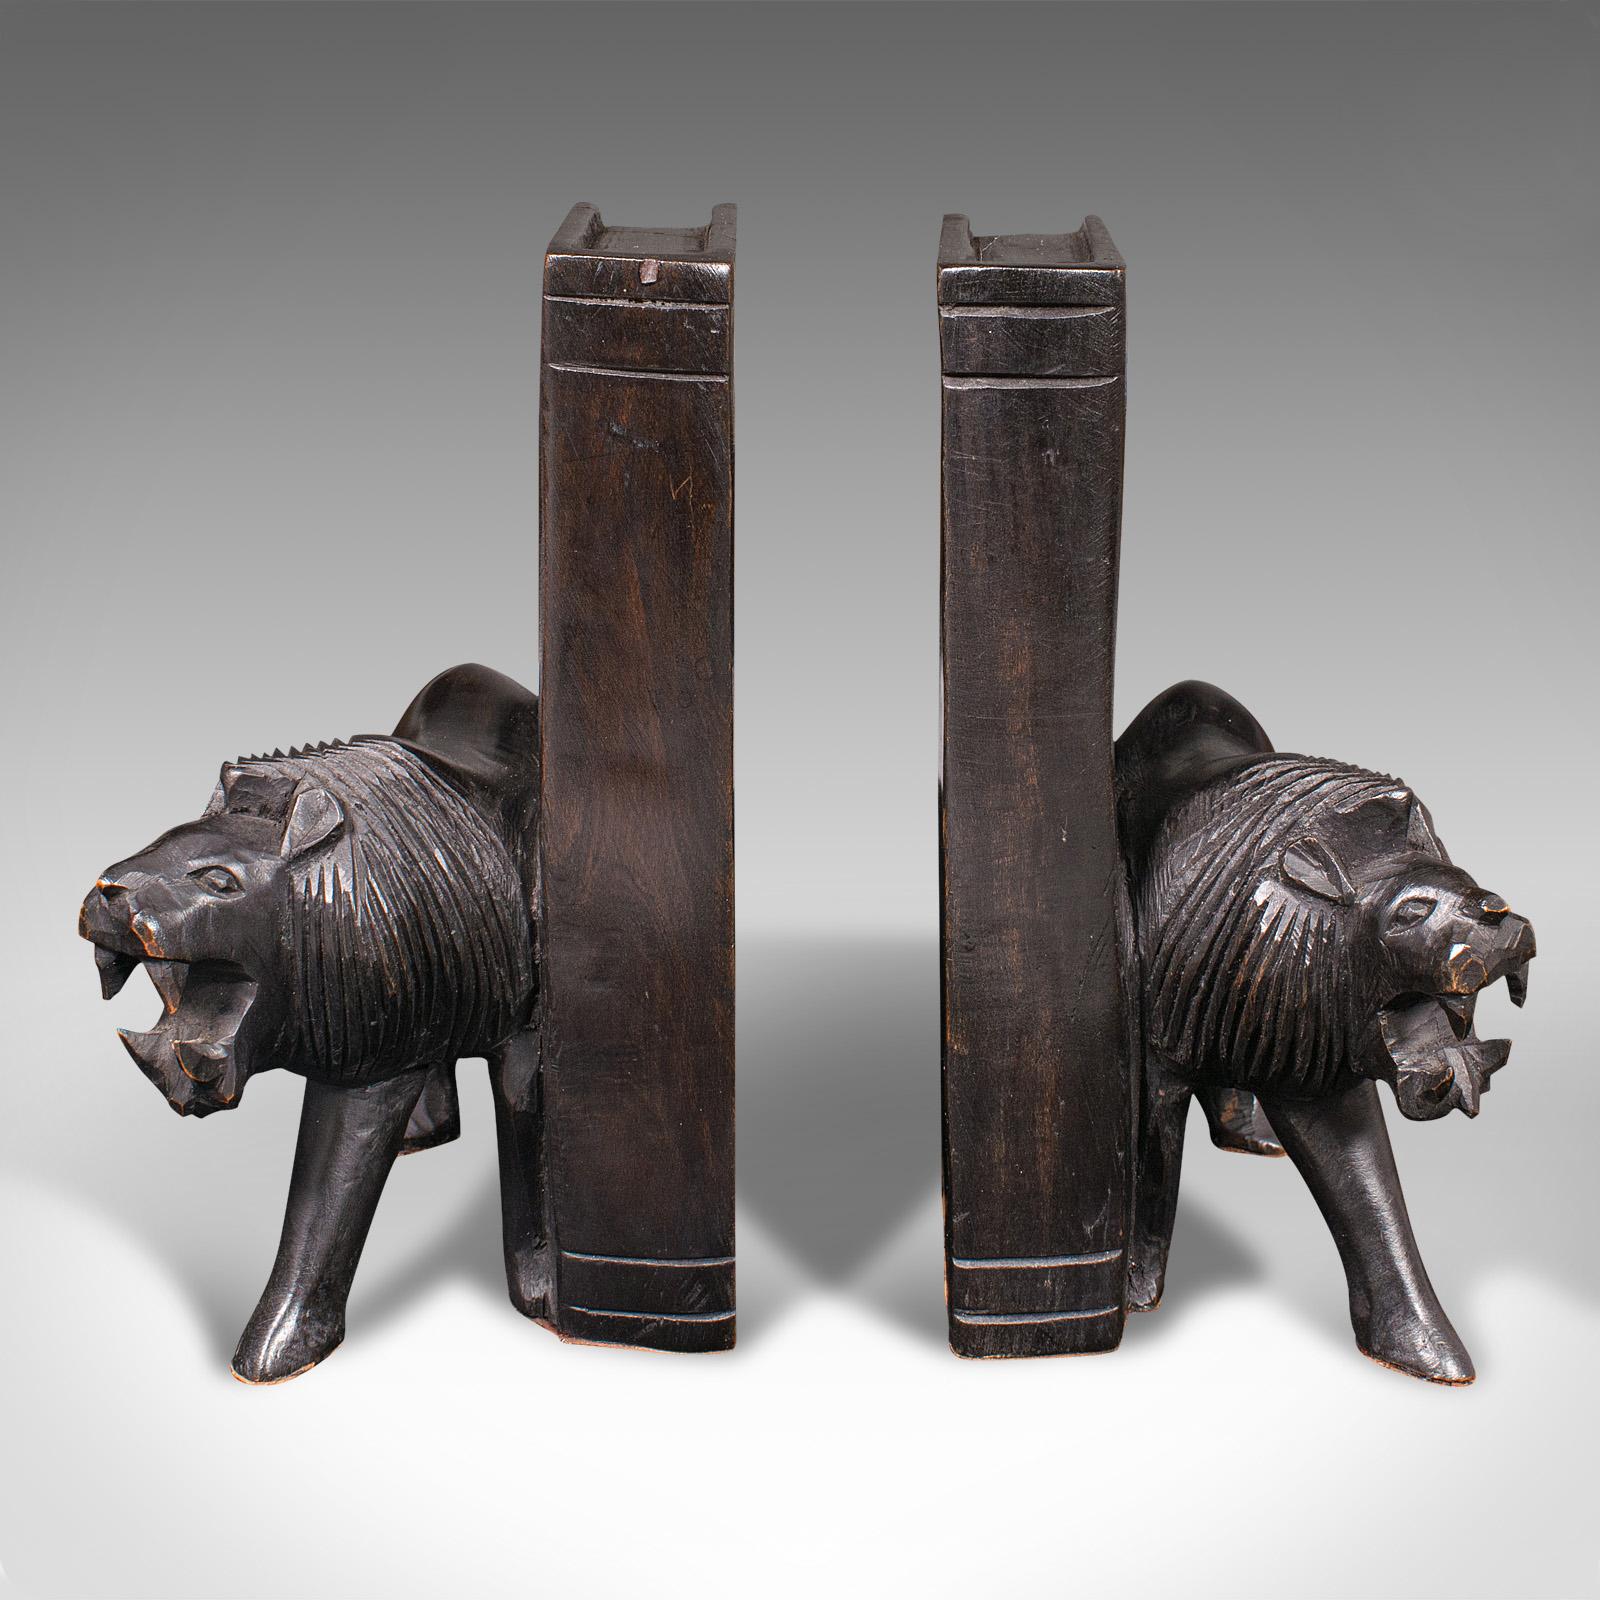 Our Stock # 18.9940

This is a pair of antique carved lion bookends. An Oriental, ebonised ironwood book rest with animal figure interest, dating to the late Victorian period, circa 1900.

Ferocious lion forms, with a charming decorative